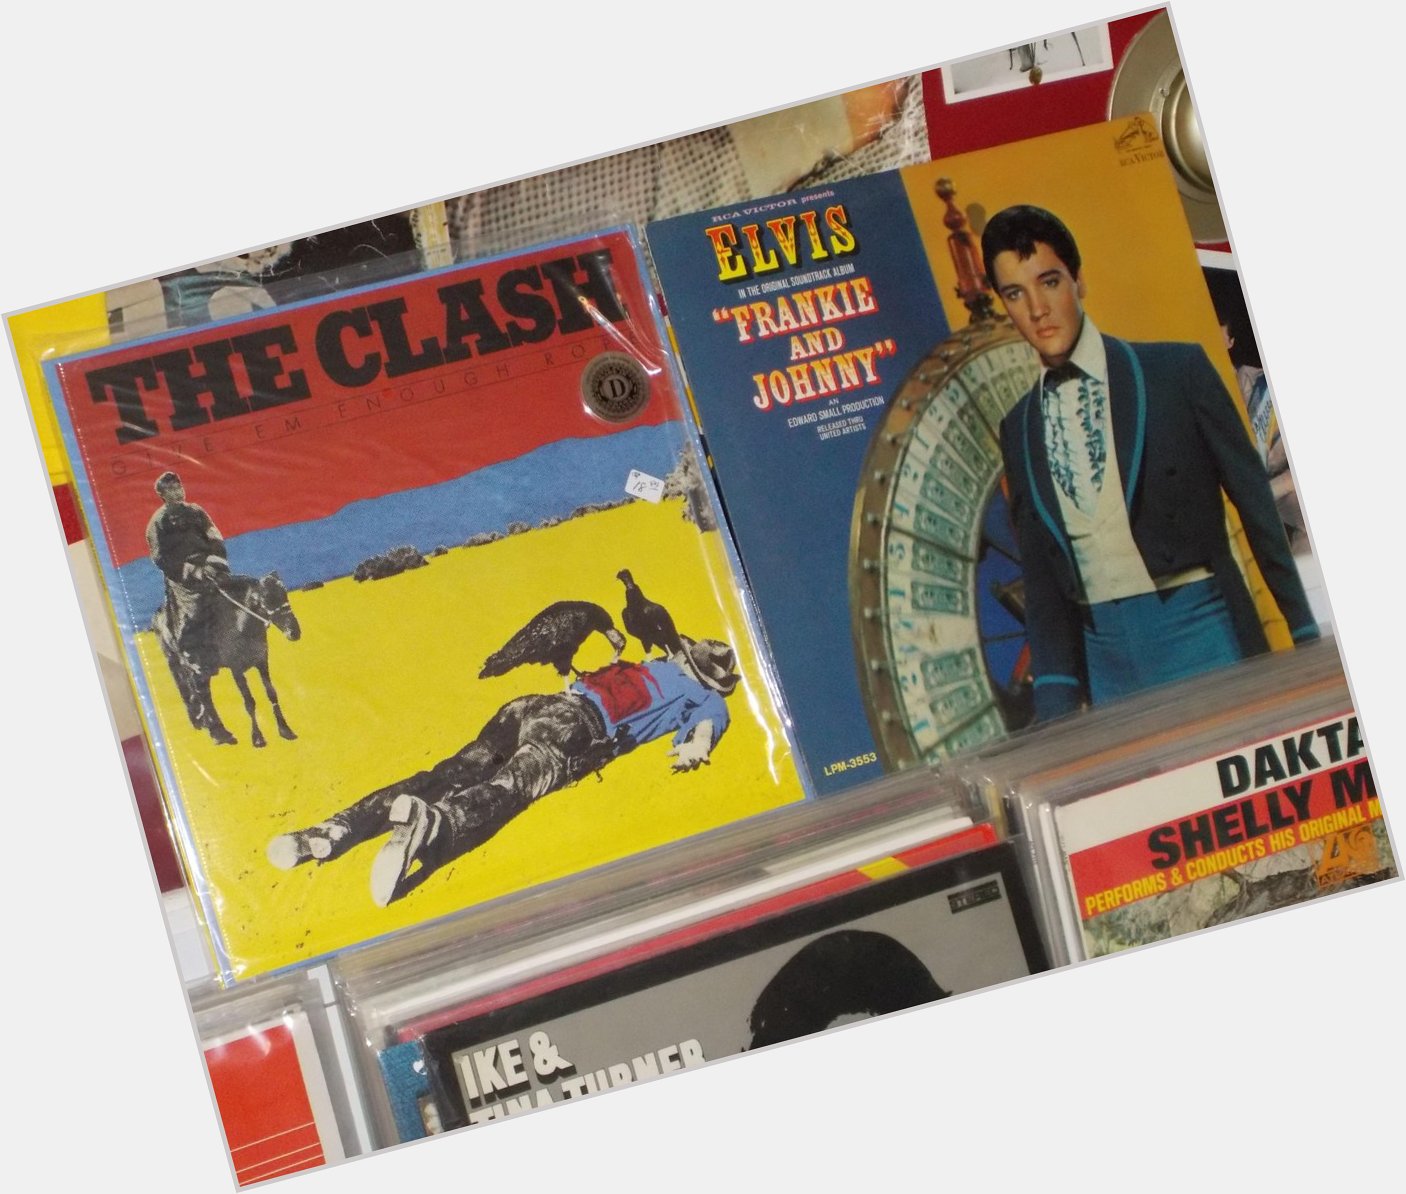 Happy Birthday to Mick Jones of the Clash and the late Col. Tom Parker, manager of Elvis 